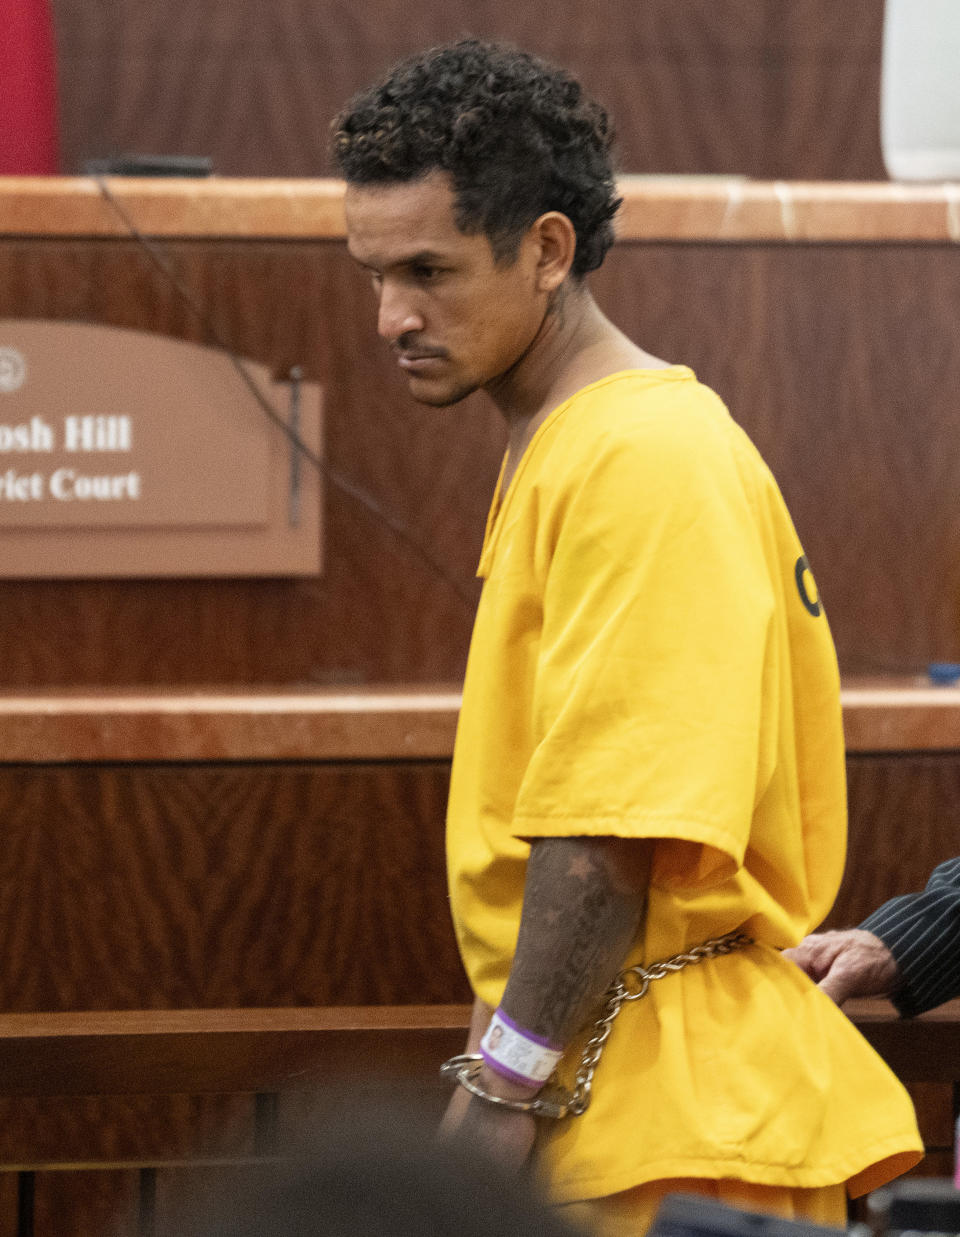 Franklin Peña, one of the two men accused of killing 12-year-old Jocelyn Nungaray, leaves the courtroom after bail was set for $10 million, Monday, June 24, 2024, in Houston. Peña and another man, Johan Jose Rangel-Martinez, are charged with capital murder over the girl's death. (Brett Coomer/Houston Chronicle via AP)